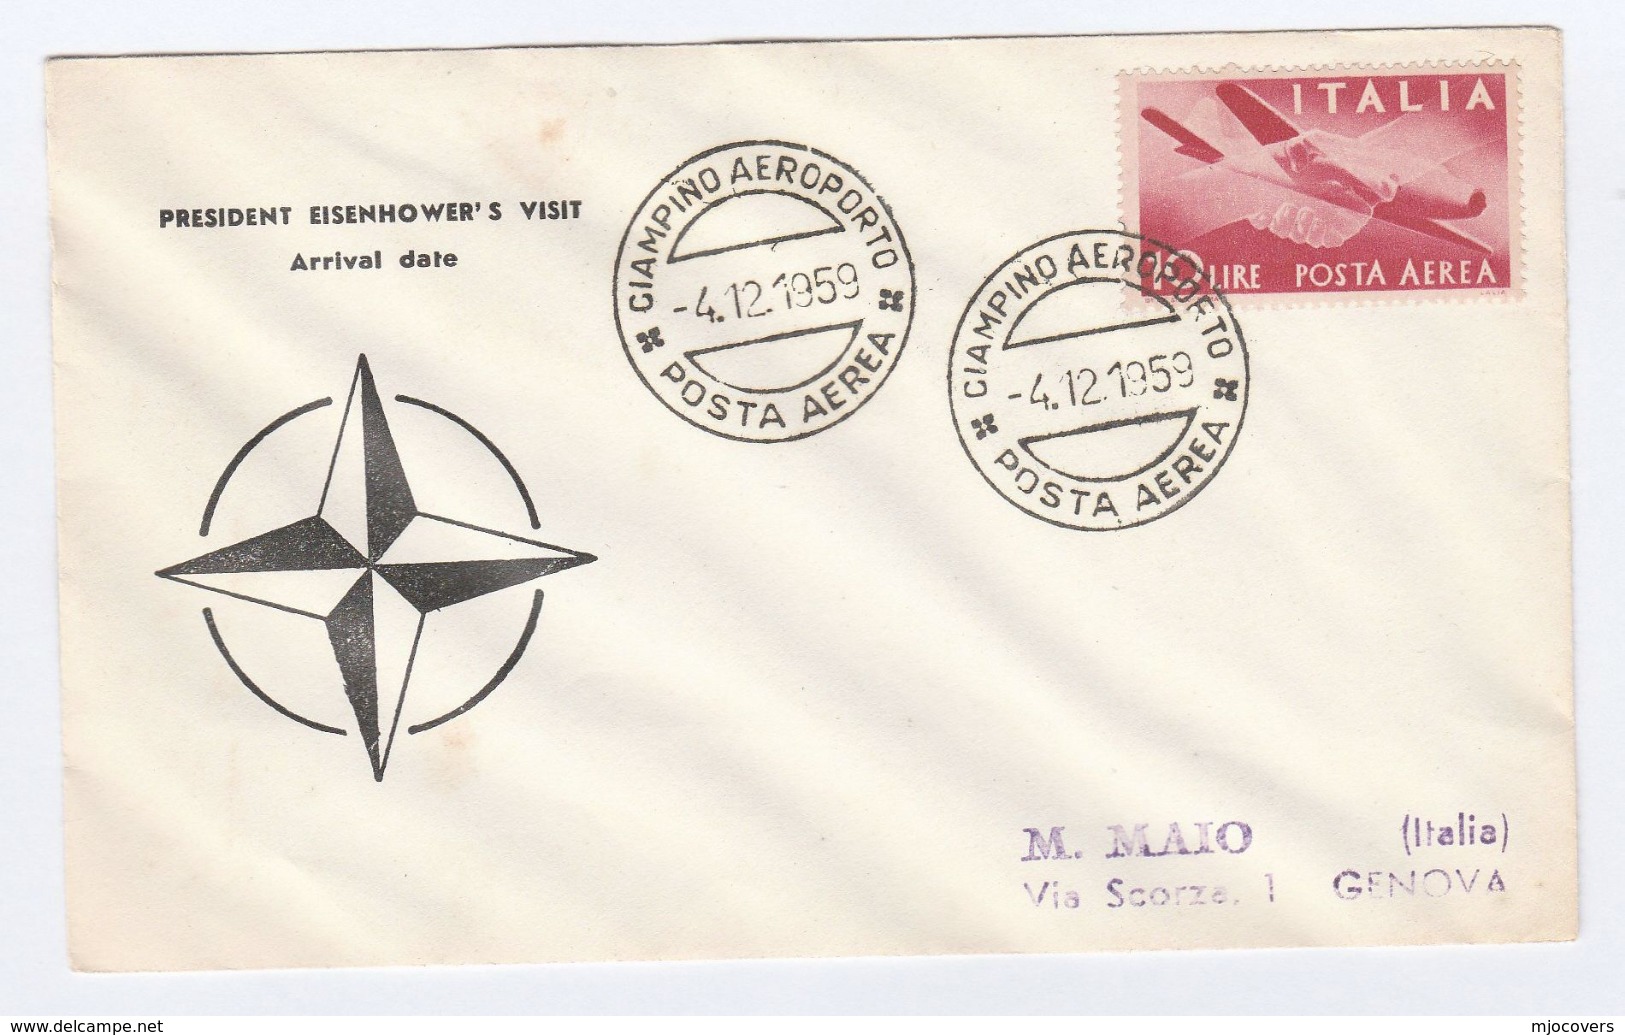 1959 ITALY PRESIDENT EISENHOWER Arrives CIAMPINO AIRPORT - NATO EVENT COVER Stamps Aviation - NATO